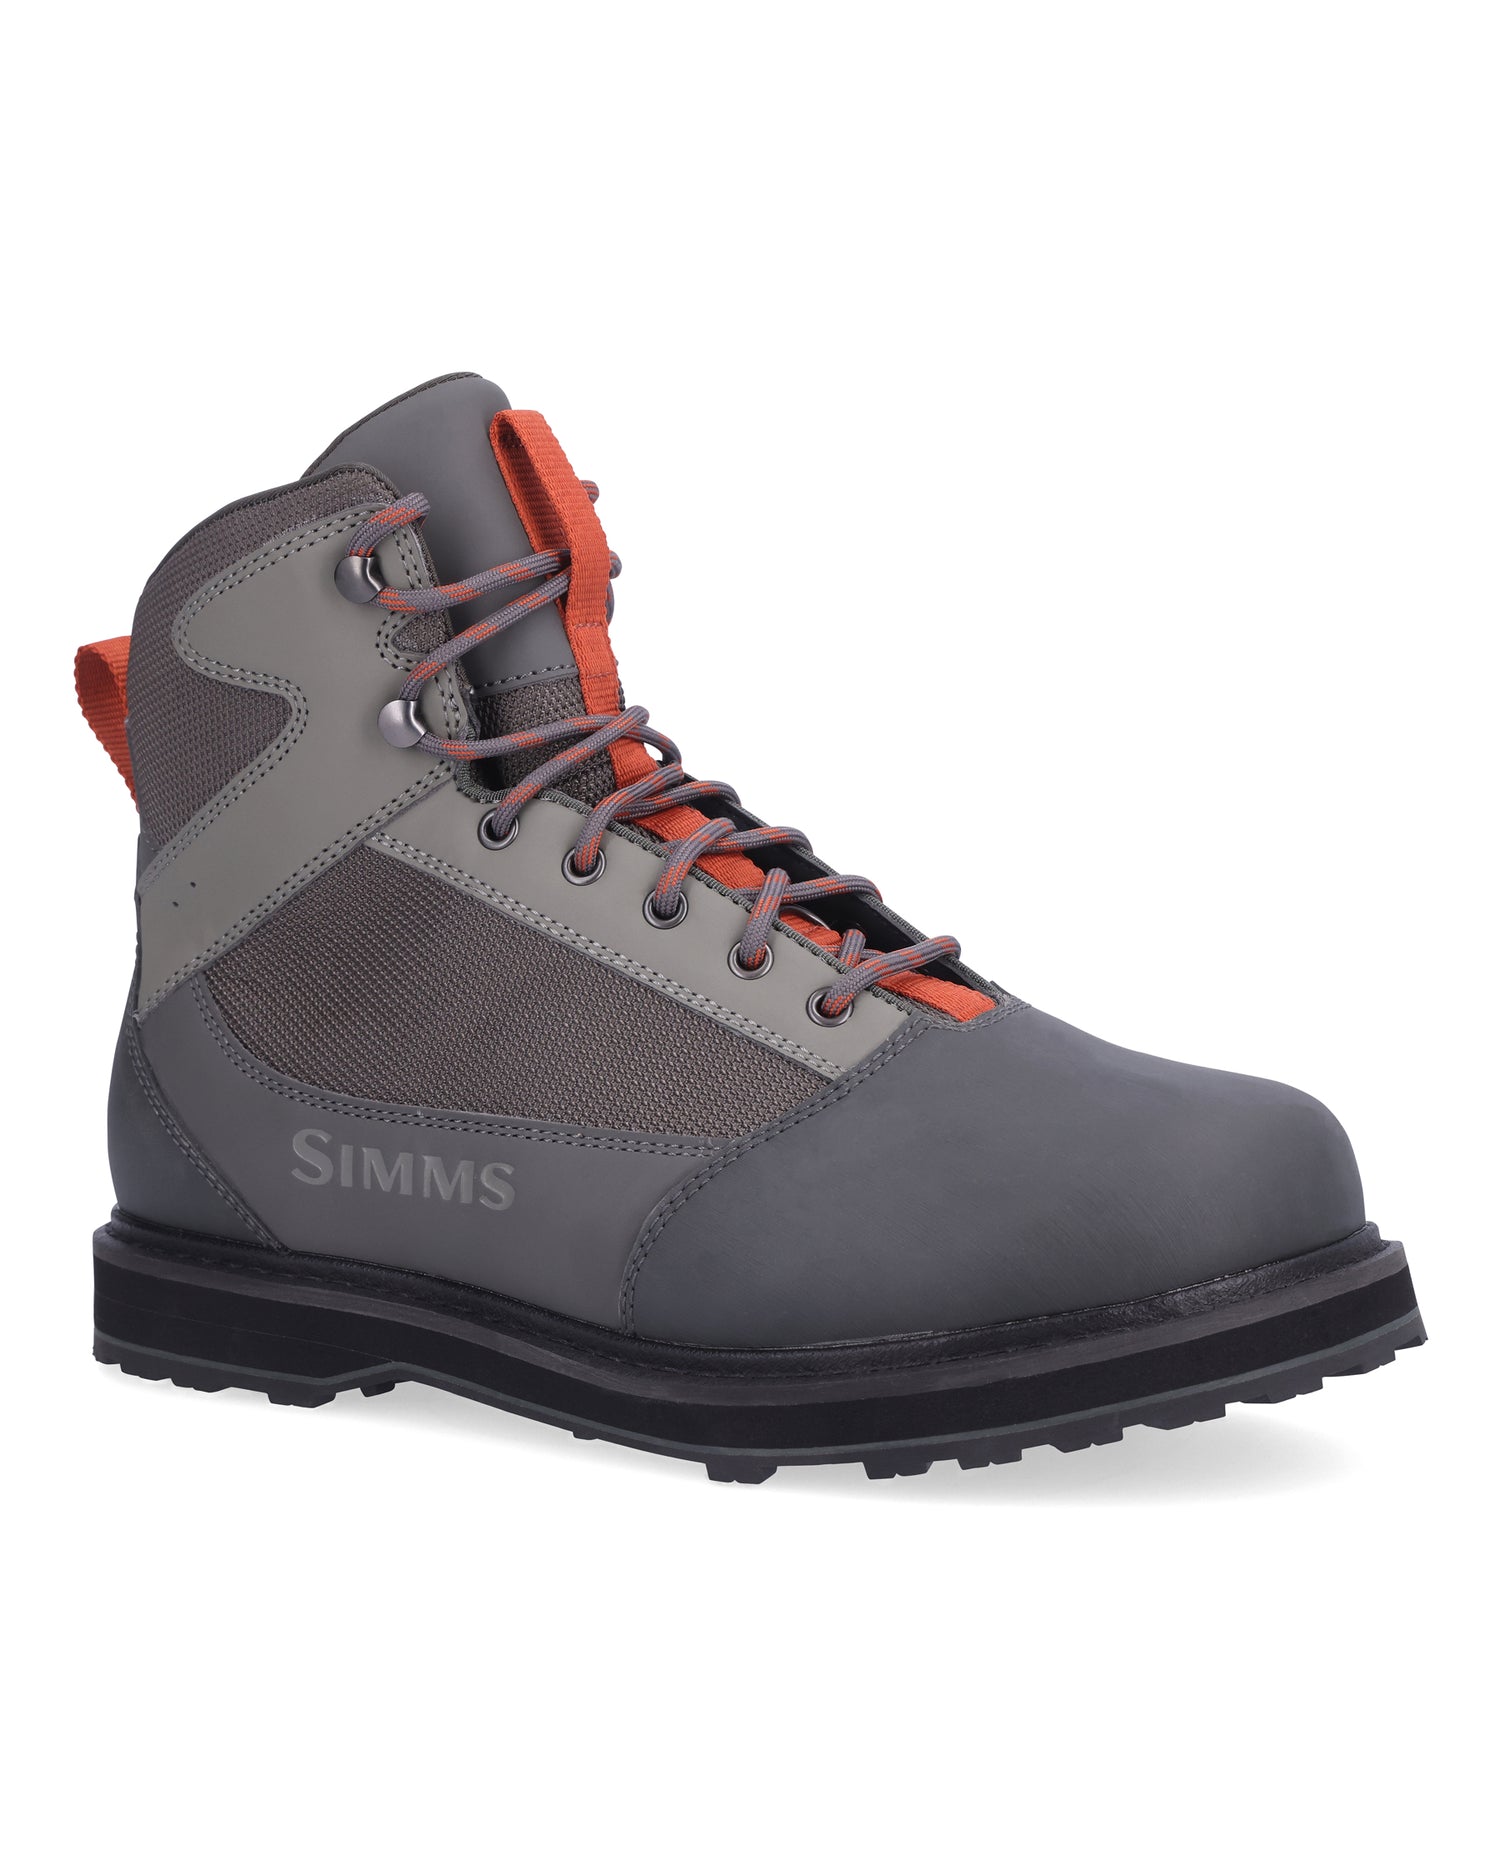 Tributary Wading Boot - Rubber Sole